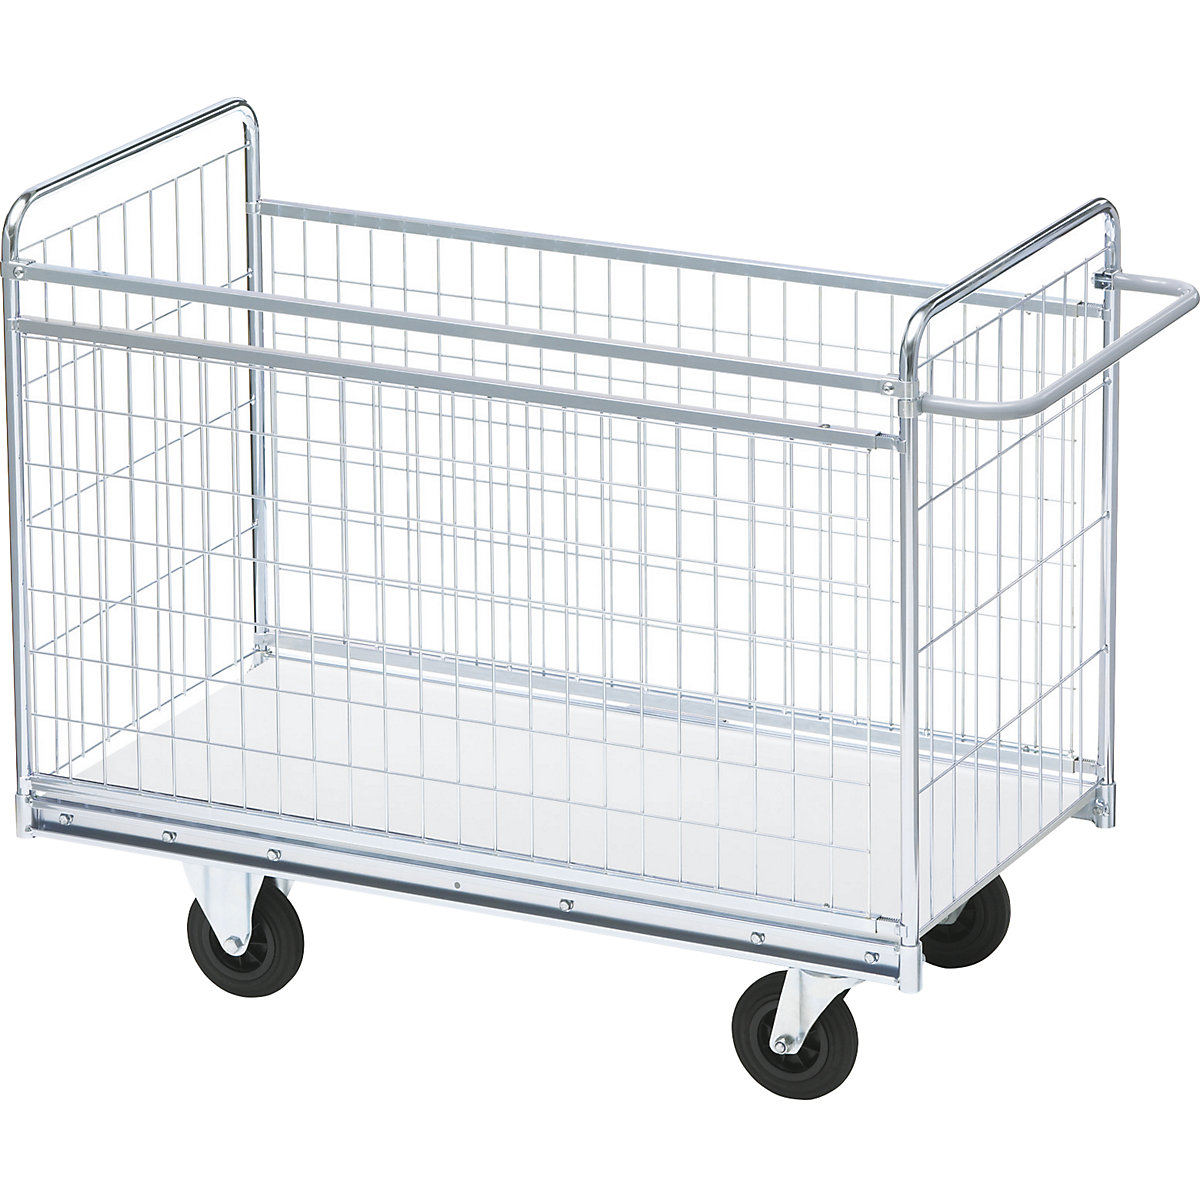 SERIES 300 four-sided trolley – HelgeNyberg, model 82, low, LxWxH 990 x 650 x 1030 mm, 5+ items-5